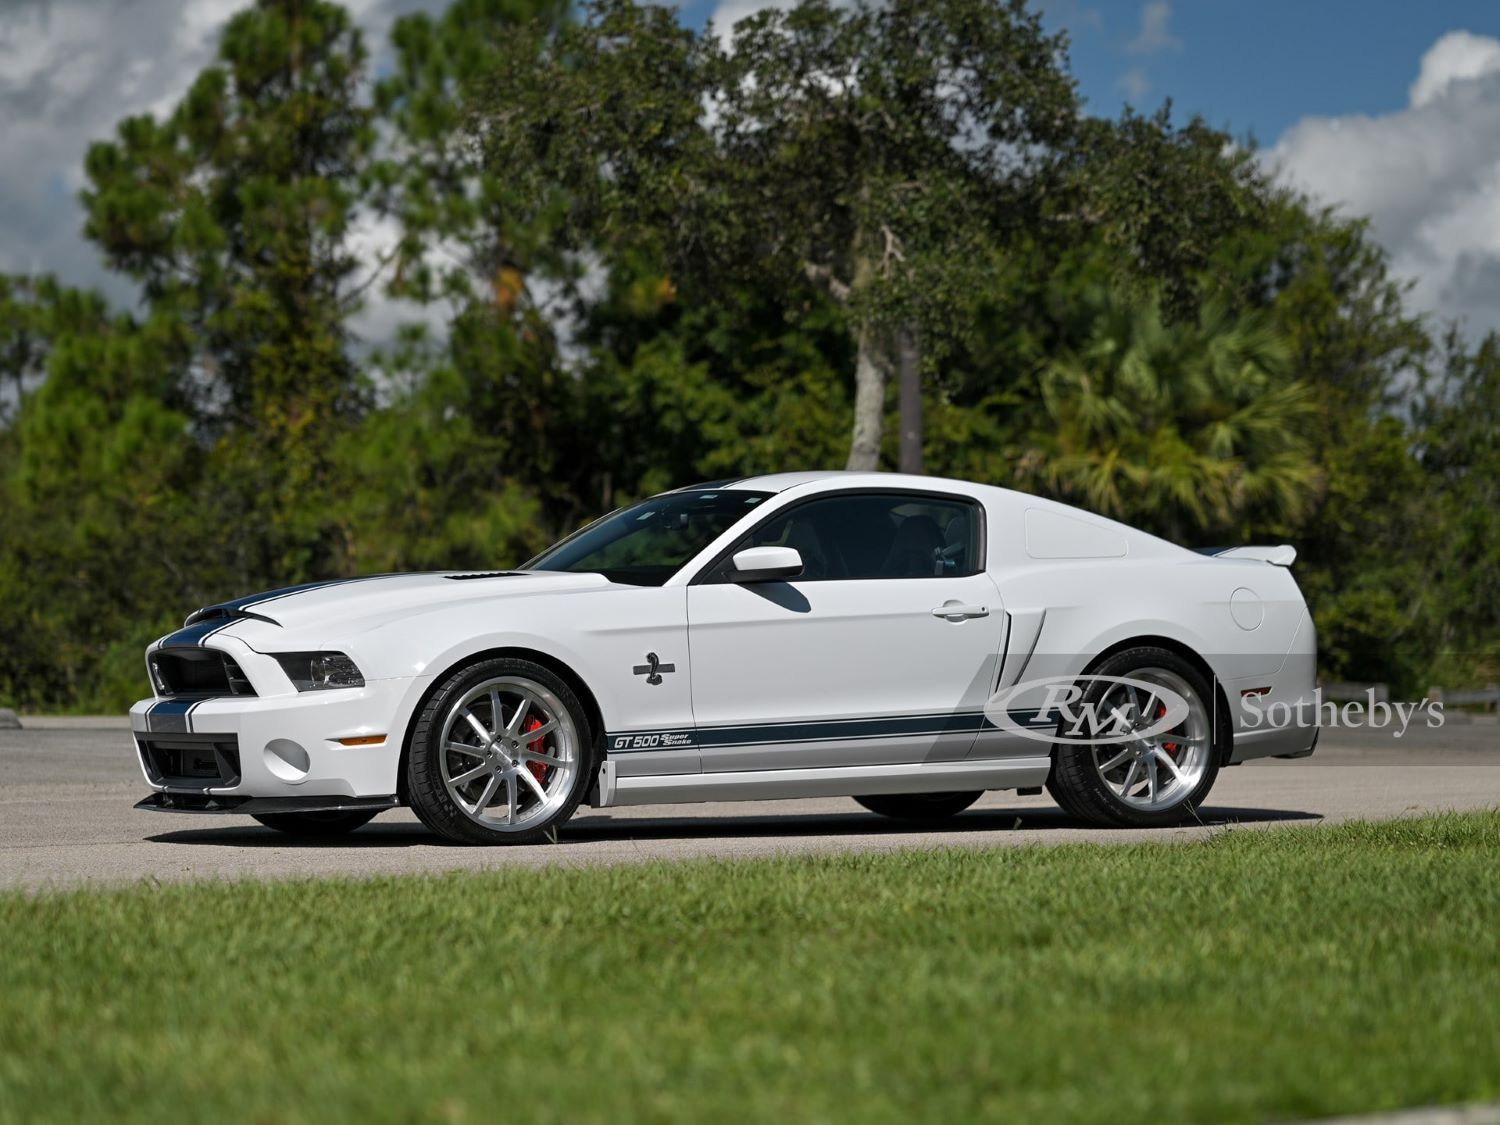 2014 Mustang Shelby Gt500 Super Snake Prototype Heads To Auction